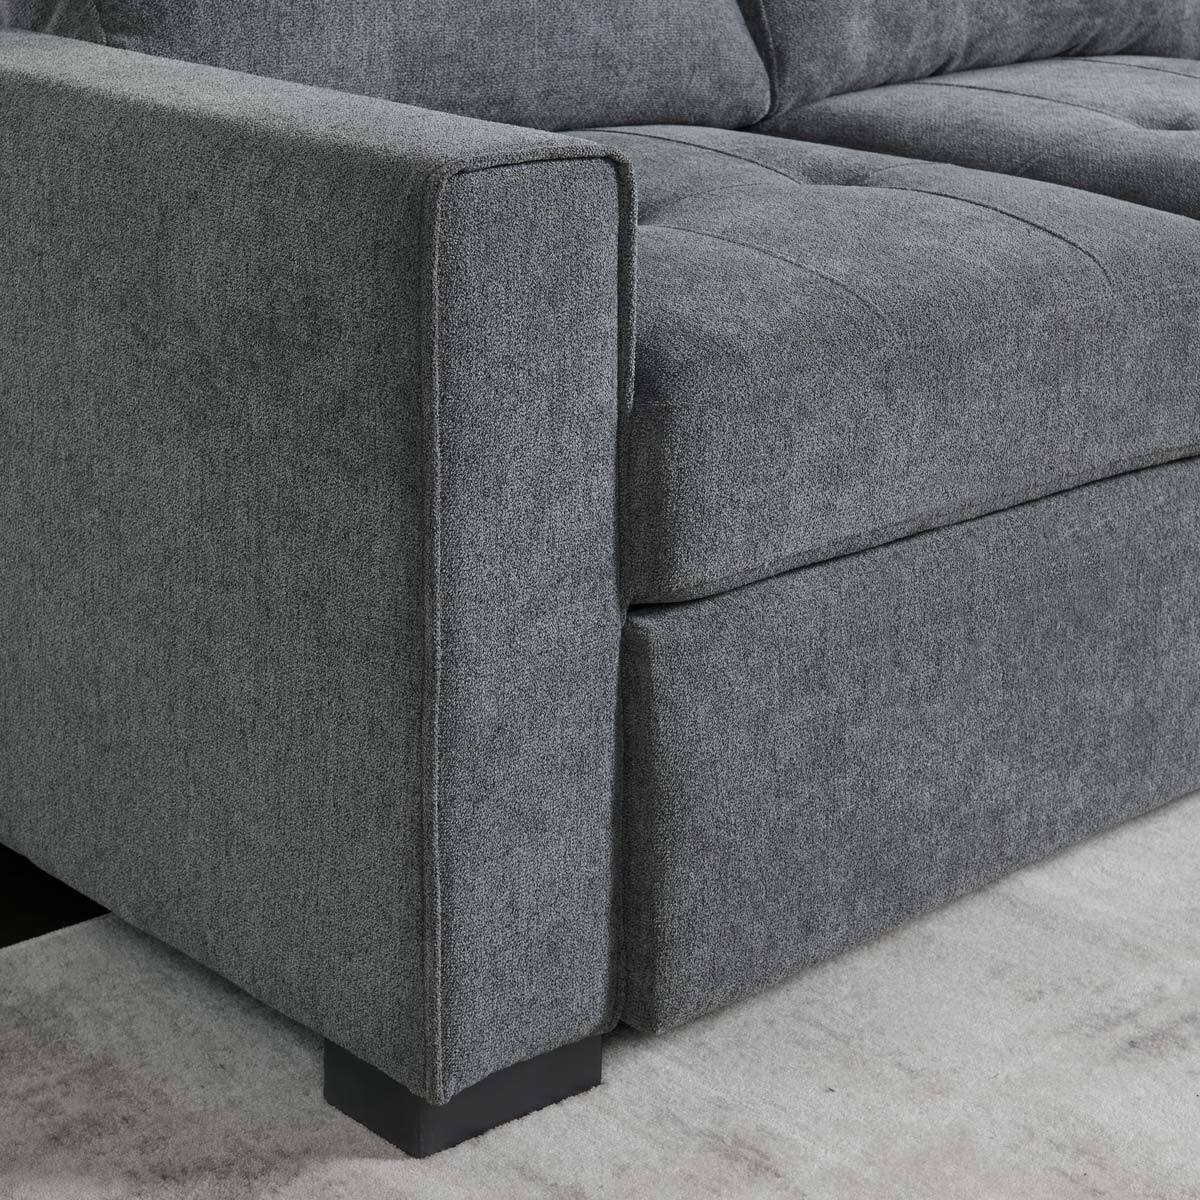 Pulaski Kendale Grey Fabric Sofa Bed with Storage Chaise